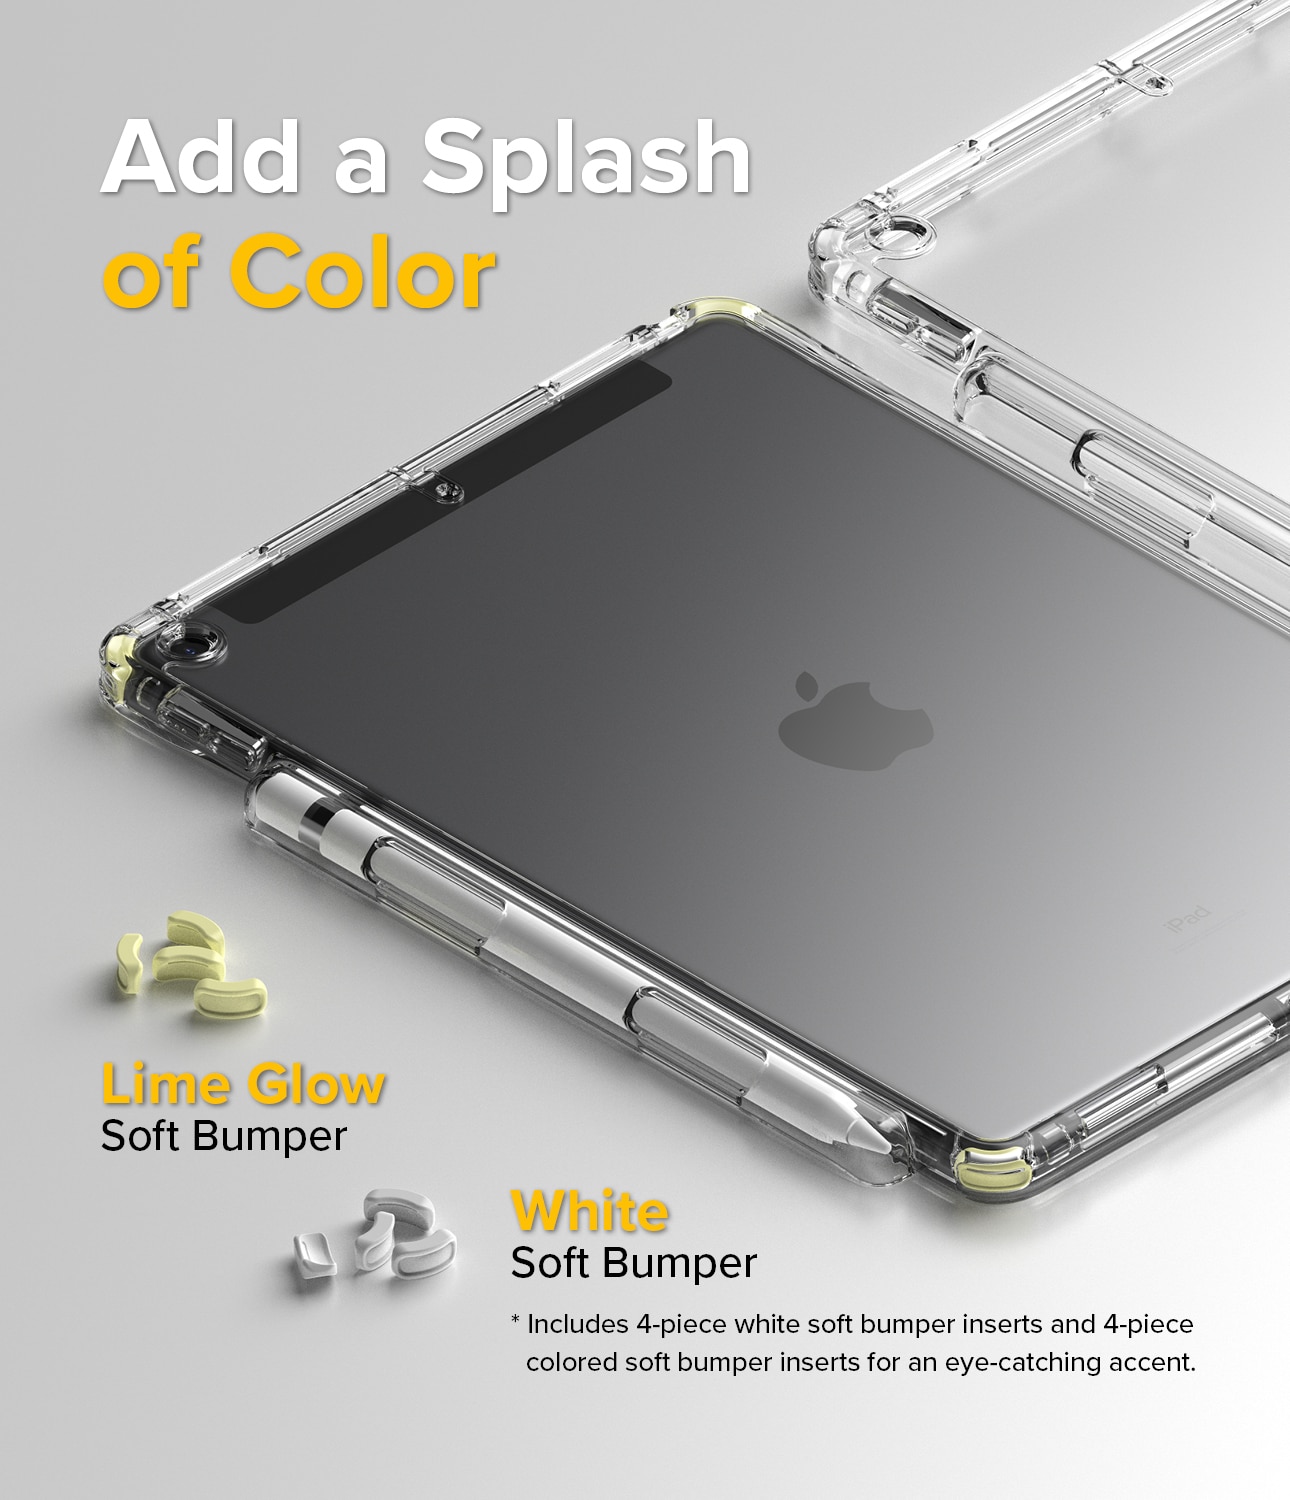 Cover Fusion Plus iPad 10.2 8th Gen (2020) White/Lime Glow